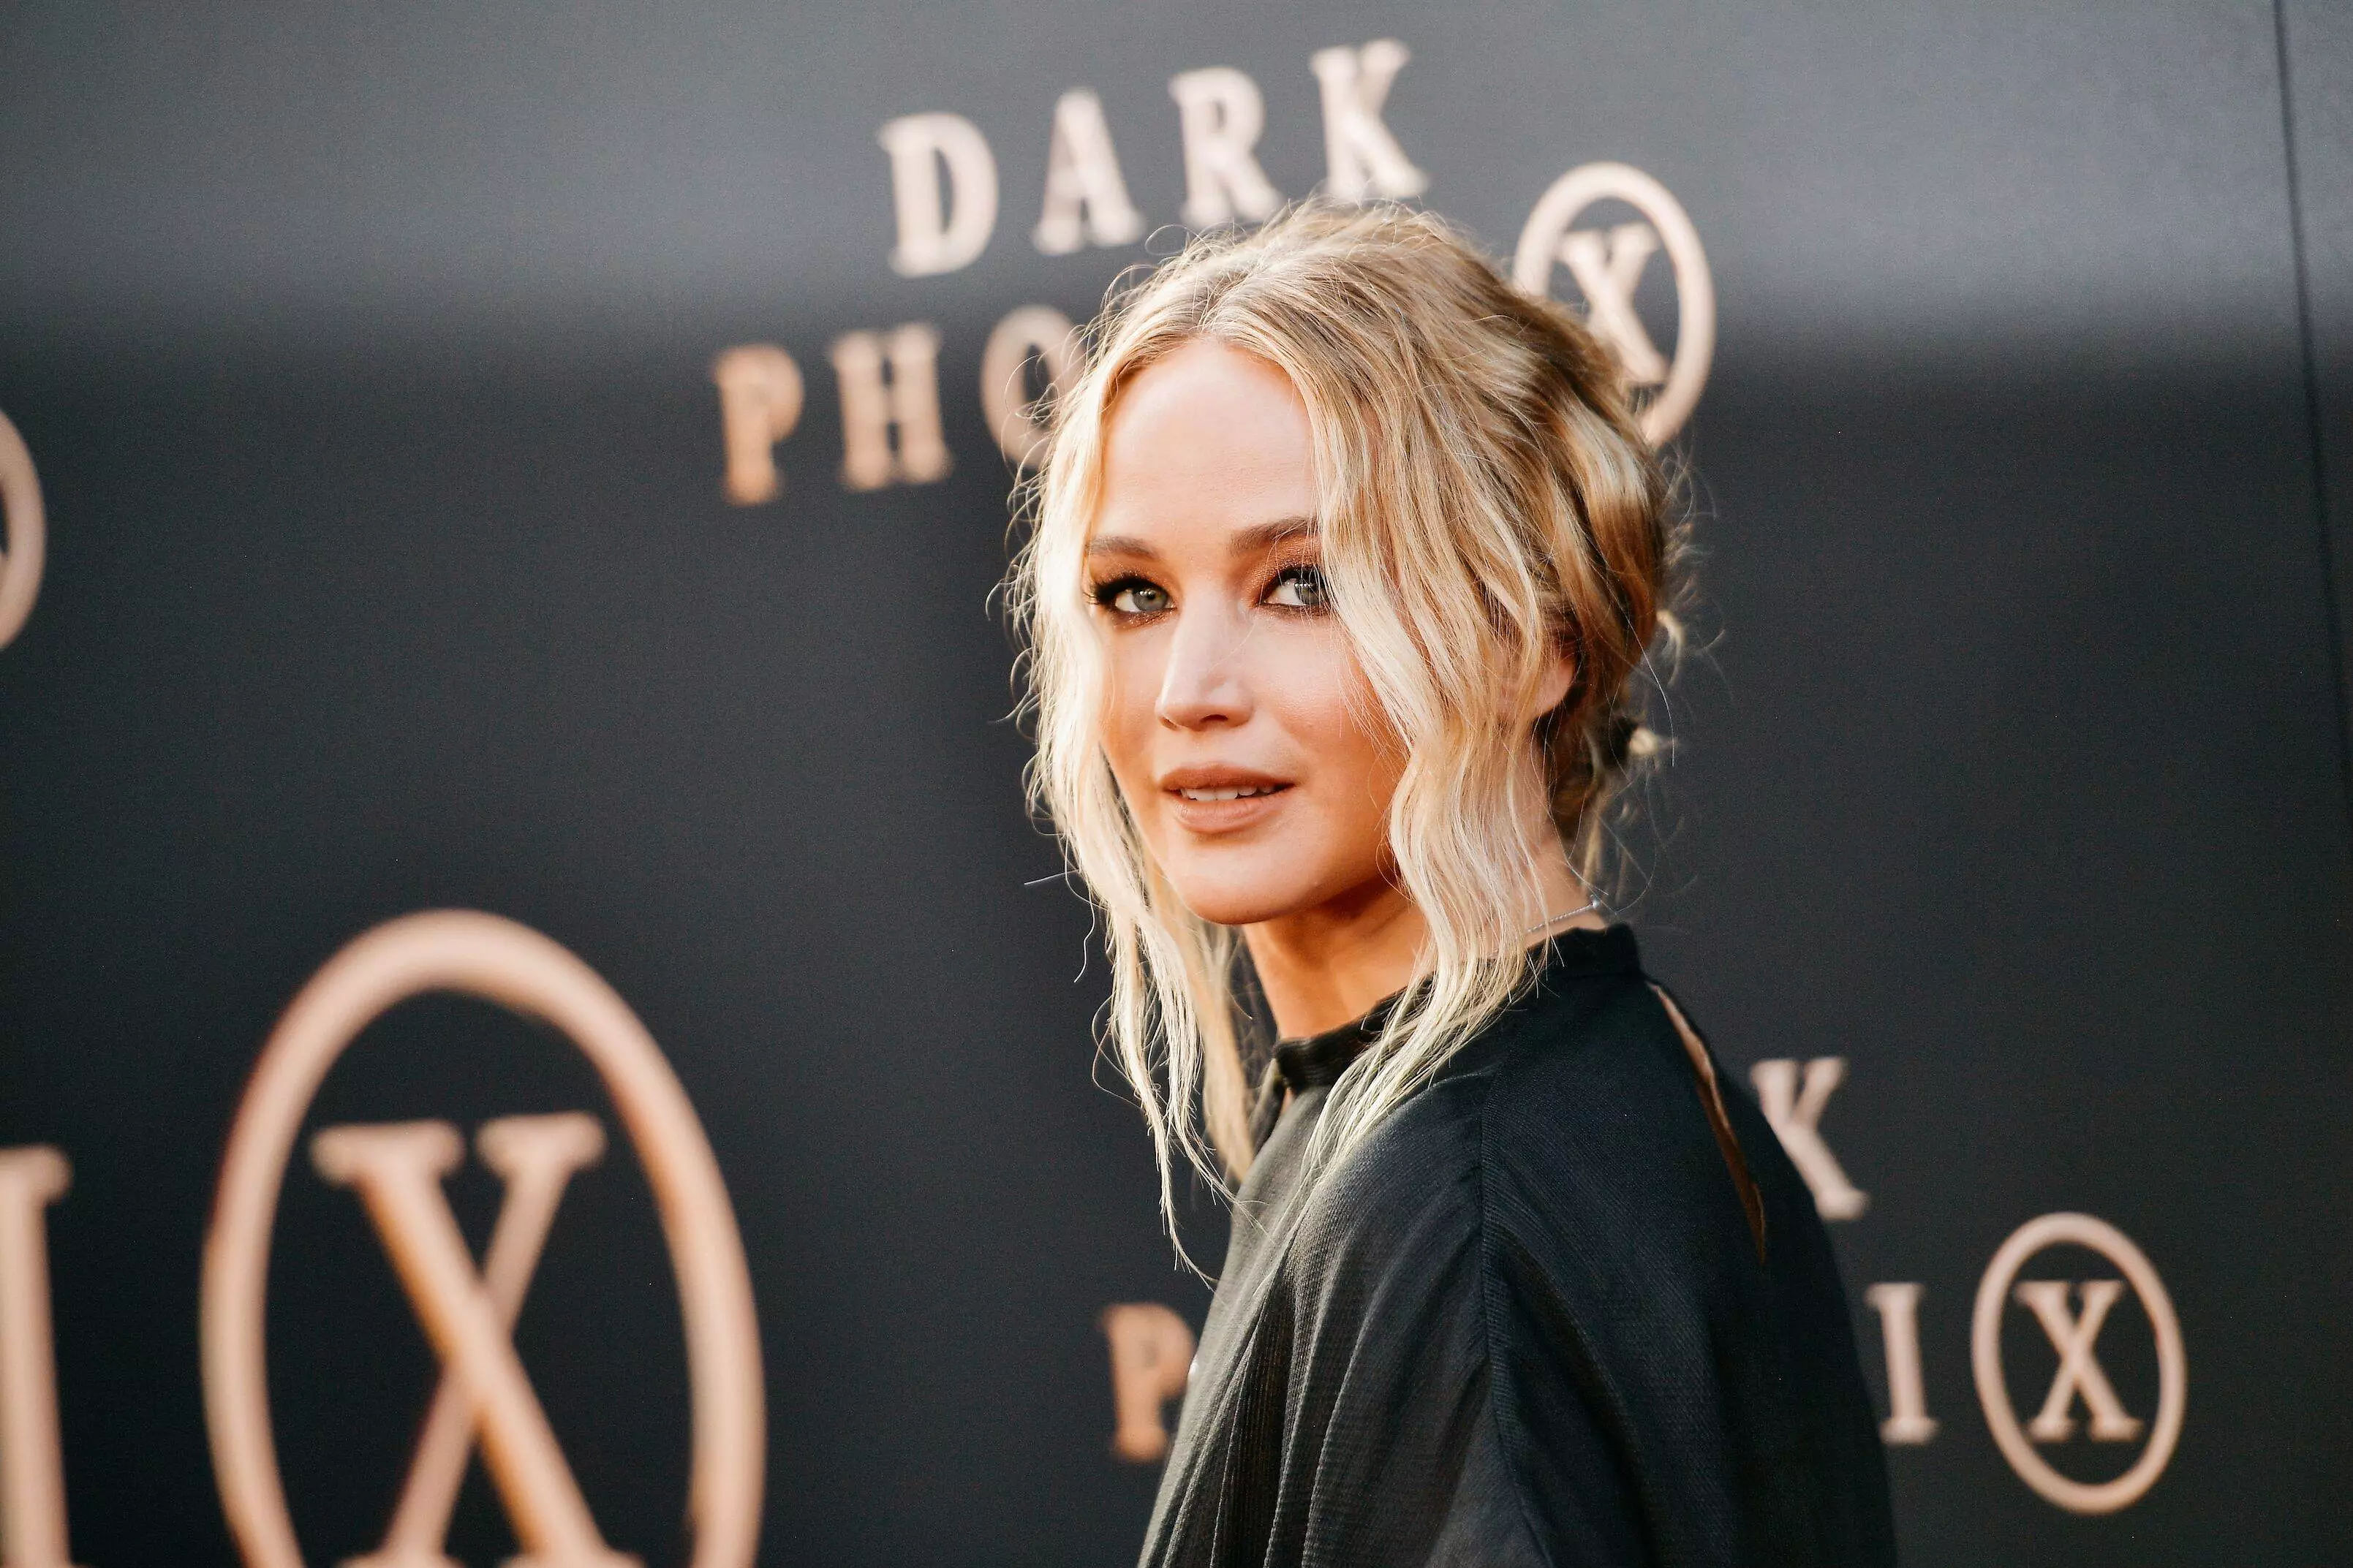 Jennifer Lawrence opens up about her 2014 leaked nude photos scandal